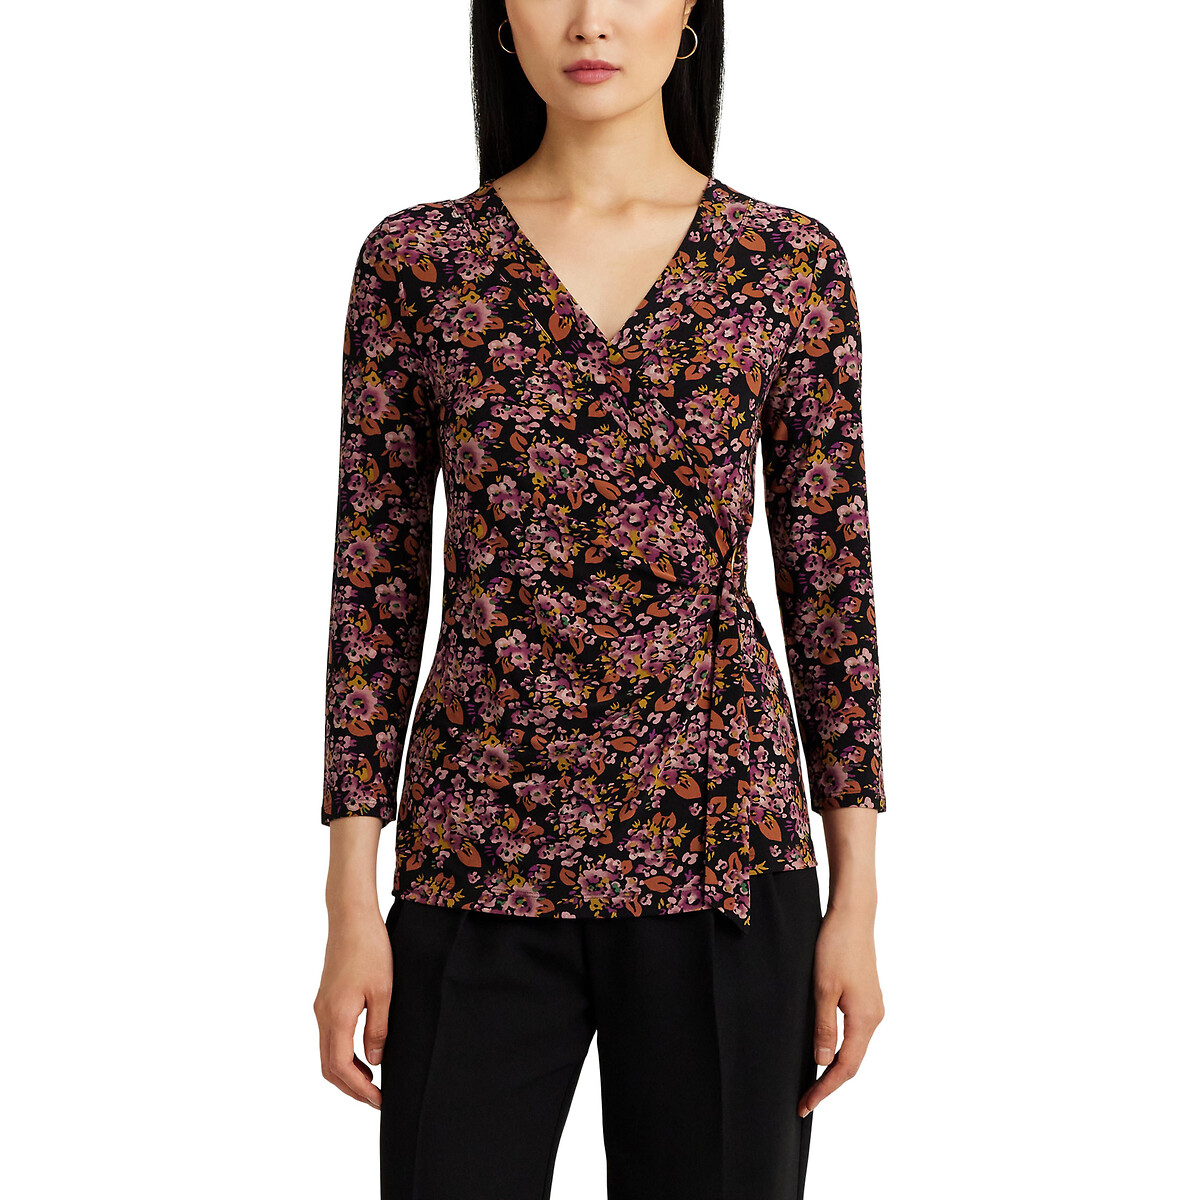 Jainab Floral V-Neck Blouse with 3/4 Length Sleeves